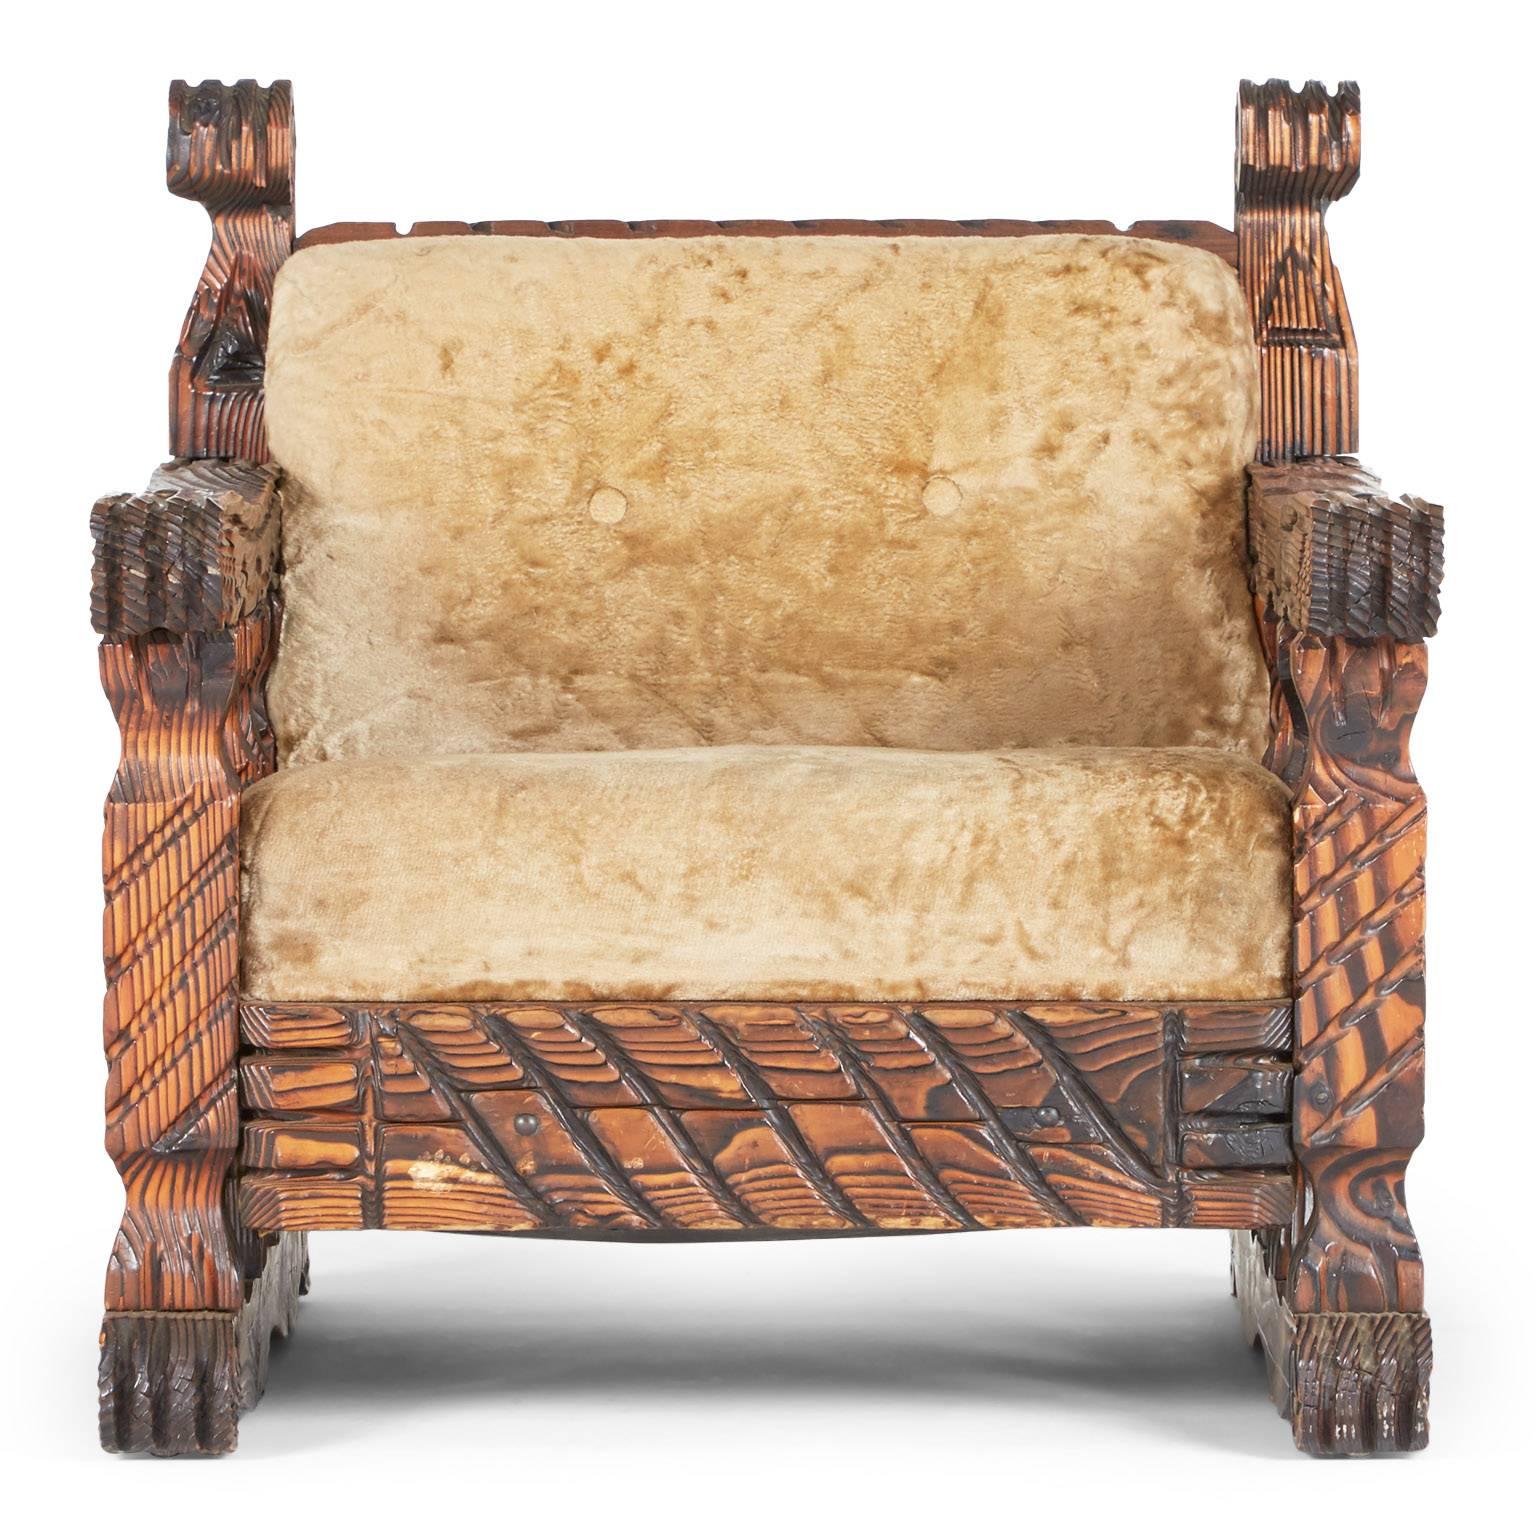 These two (2) ornately crafted red walnut armchairs with carved exotic details are a testament to William Westenhaver's Modern Primitive creations. Westenhaver joined forces with Western International Trading Company in 1957 to bring his vision of